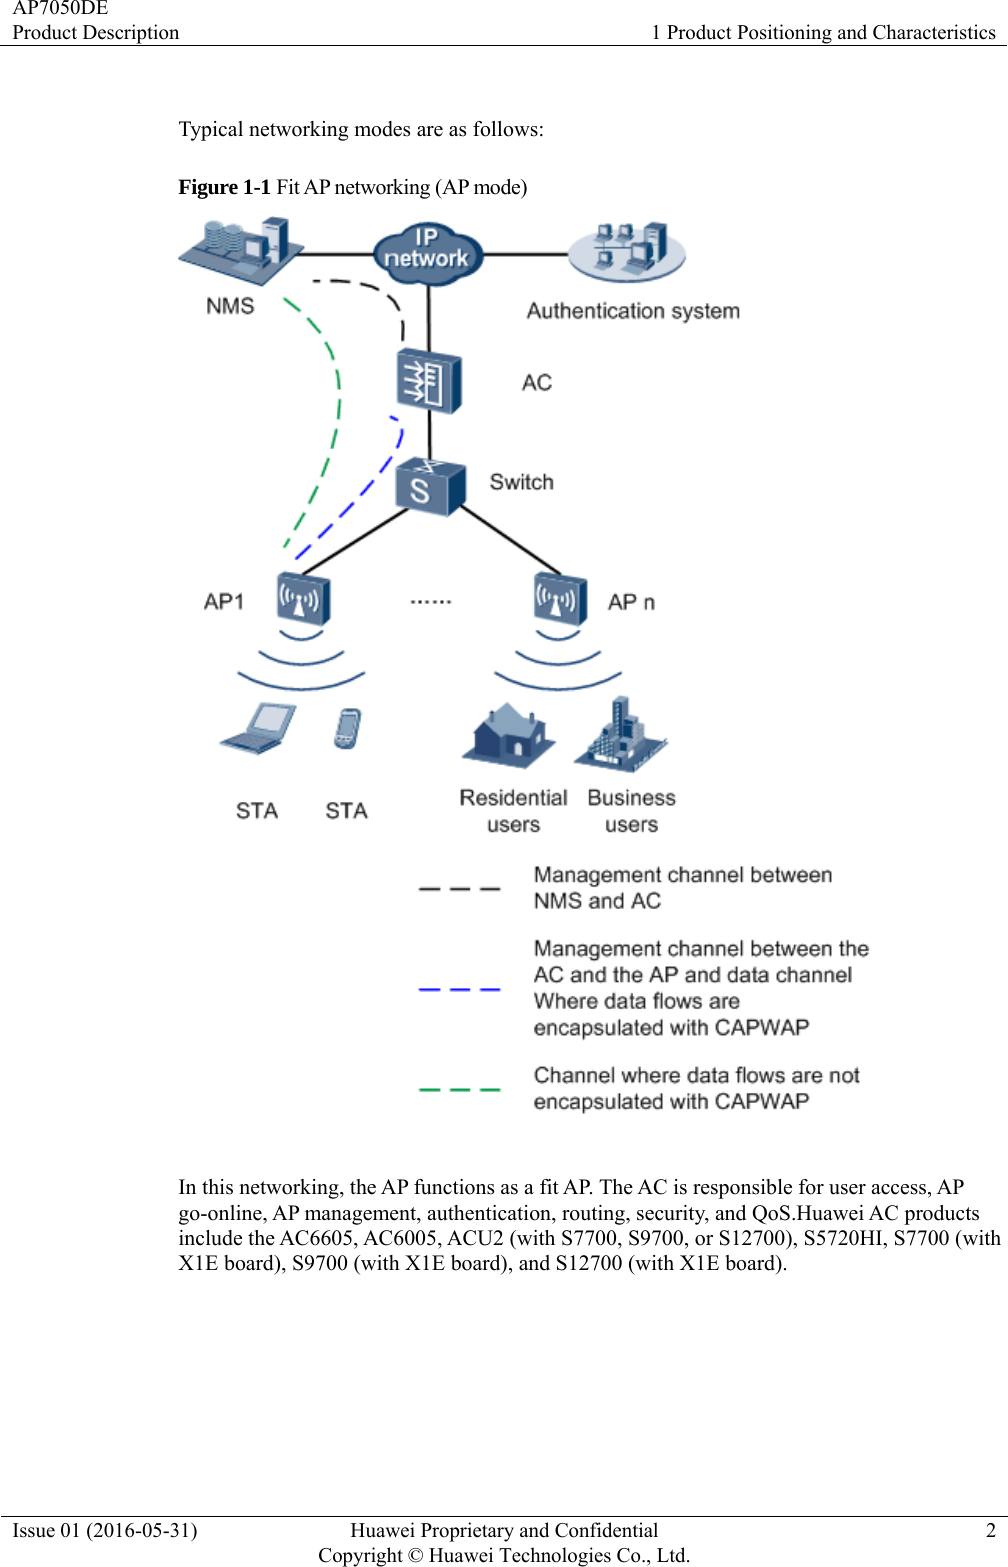 AP7050DE Product Description  1 Product Positioning and Characteristics Issue 01 (2016-05-31)  Huawei Proprietary and Confidential         Copyright © Huawei Technologies Co., Ltd.2  Typical networking modes are as follows: Figure 1-1 Fit AP networking (AP mode)   In this networking, the AP functions as a fit AP. The AC is responsible for user access, AP go-online, AP management, authentication, routing, security, and QoS.Huawei AC products include the AC6605, AC6005, ACU2 (with S7700, S9700, or S12700), S5720HI, S7700 (with X1E board), S9700 (with X1E board), and S12700 (with X1E board). 